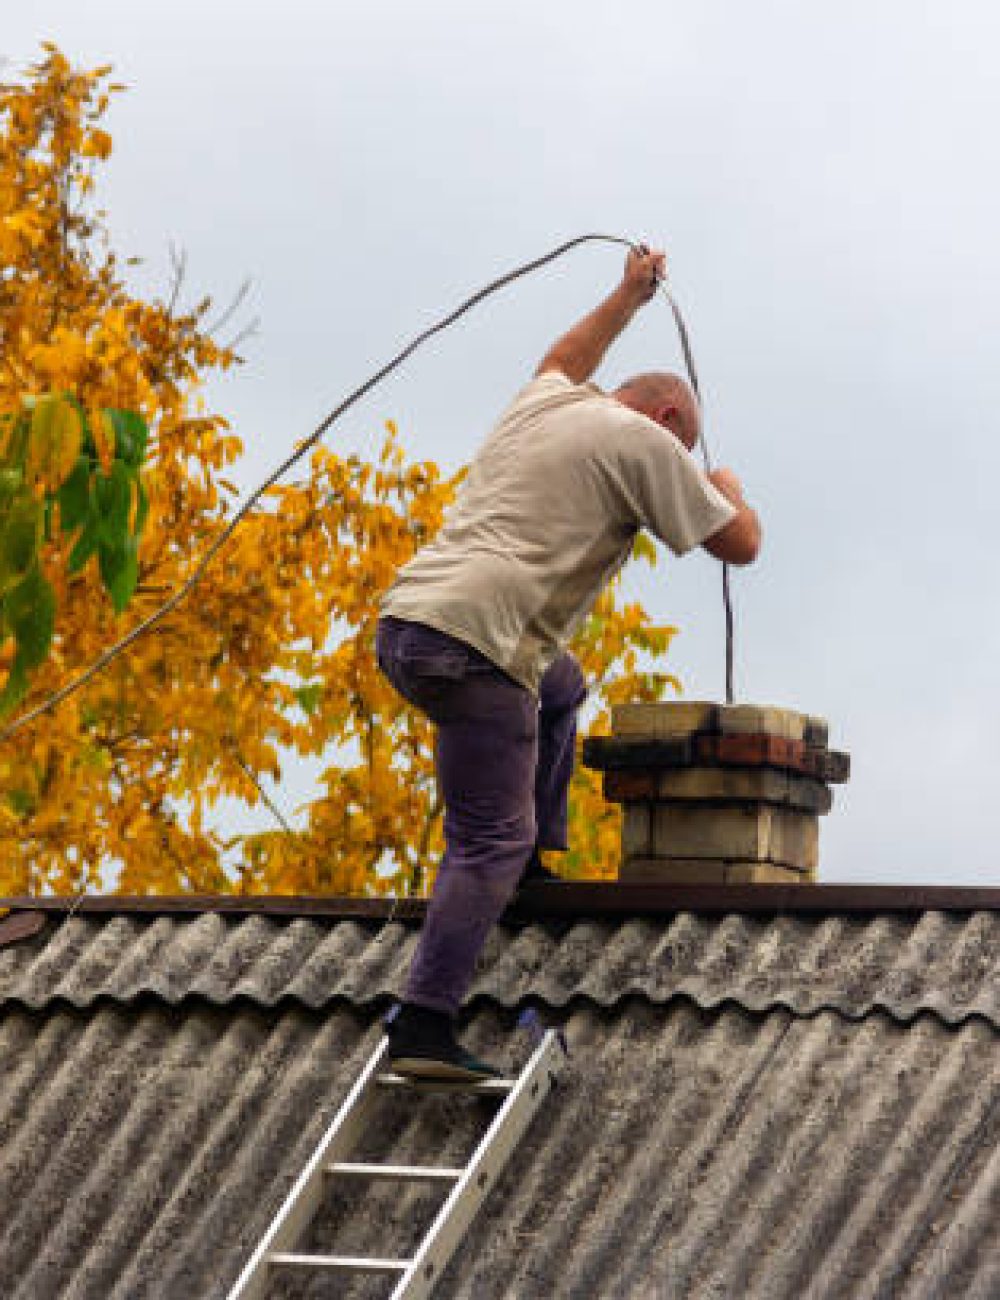 a male chimney sweep cleans the chimney from soot on the roof of a village house, preparation for the heating season